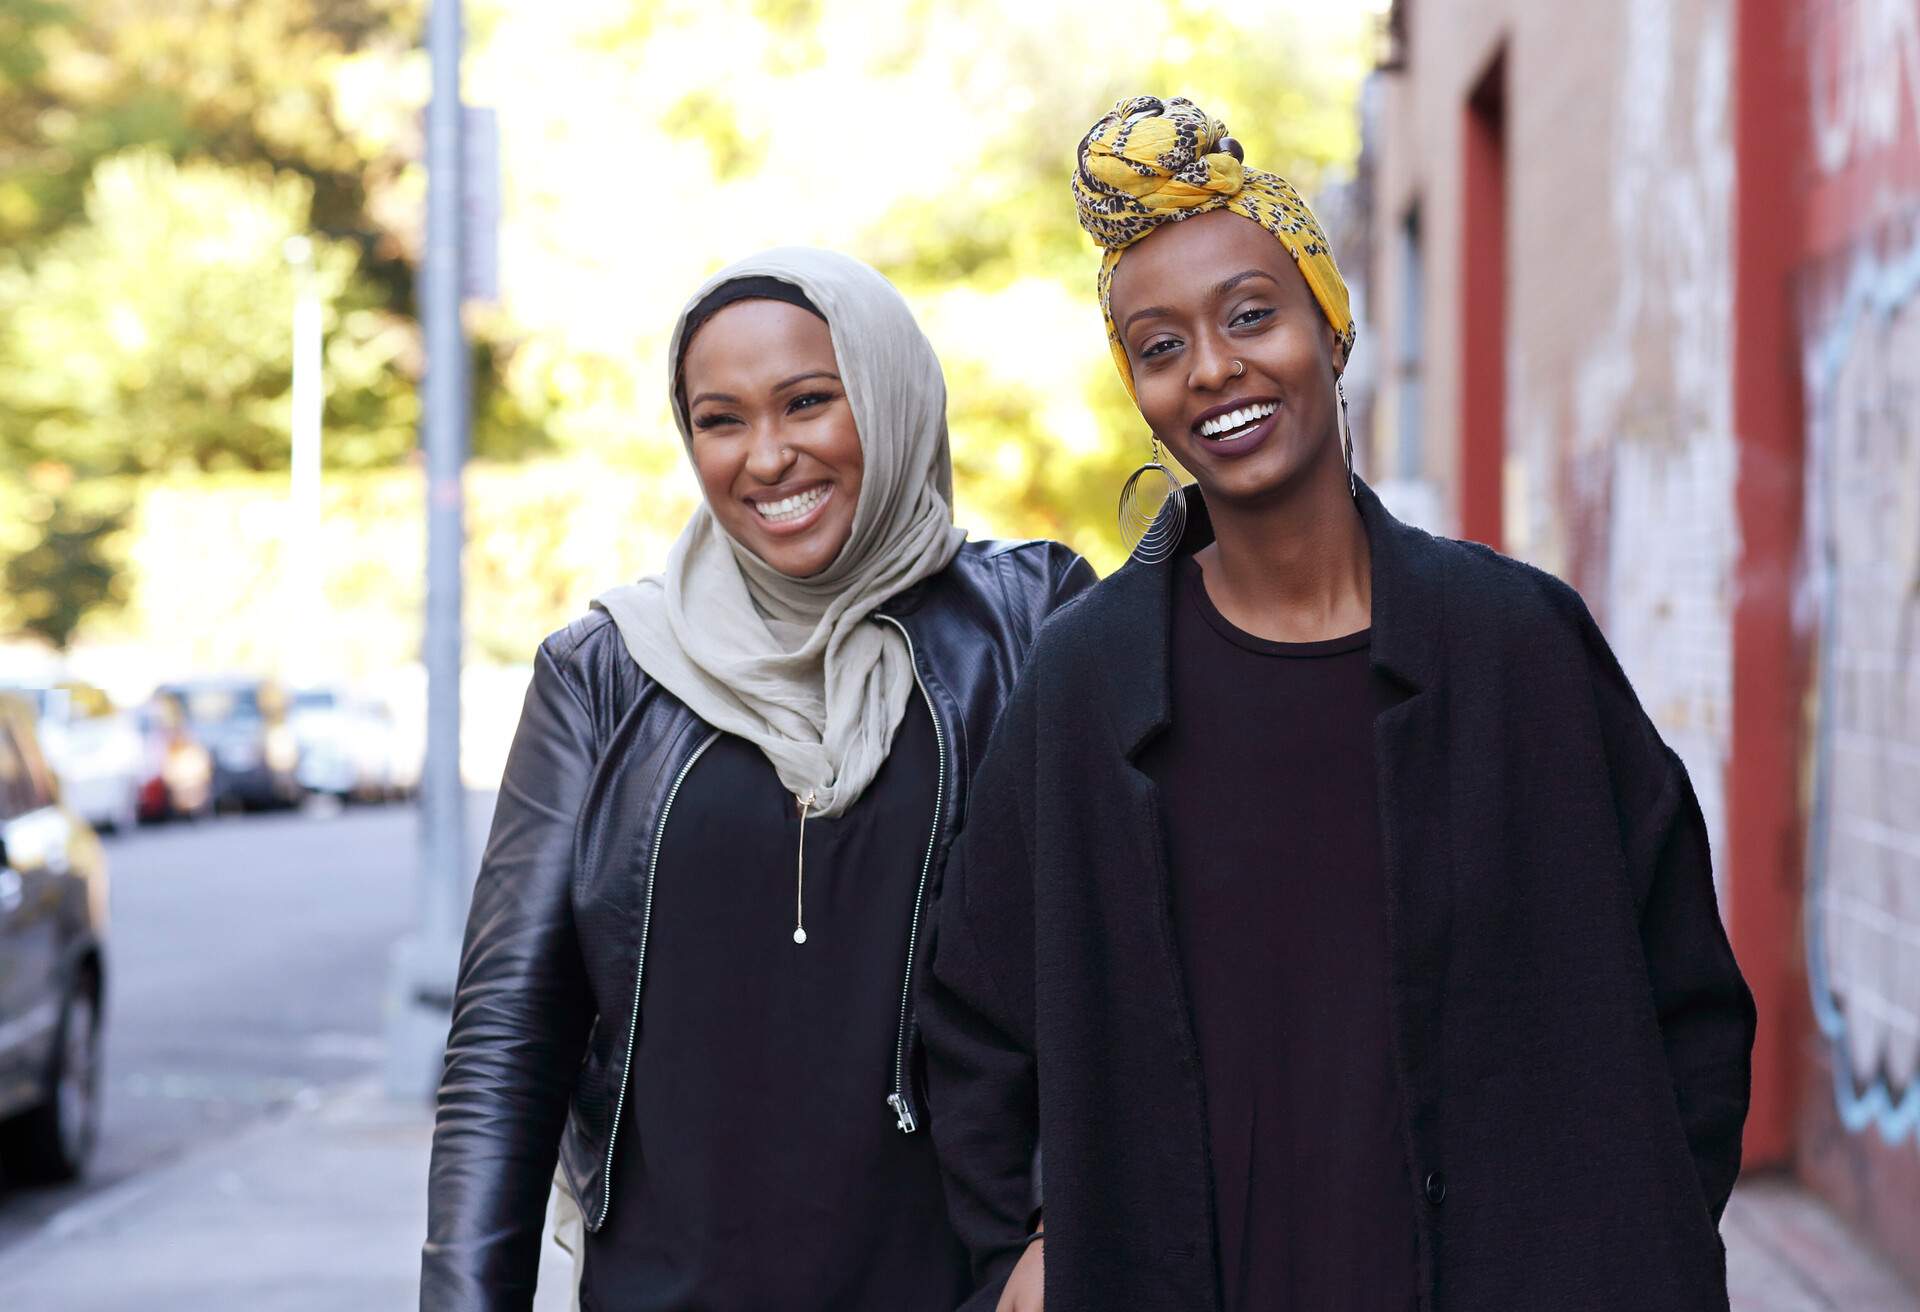 Two young, Muslim women walking down the street, laughing together.